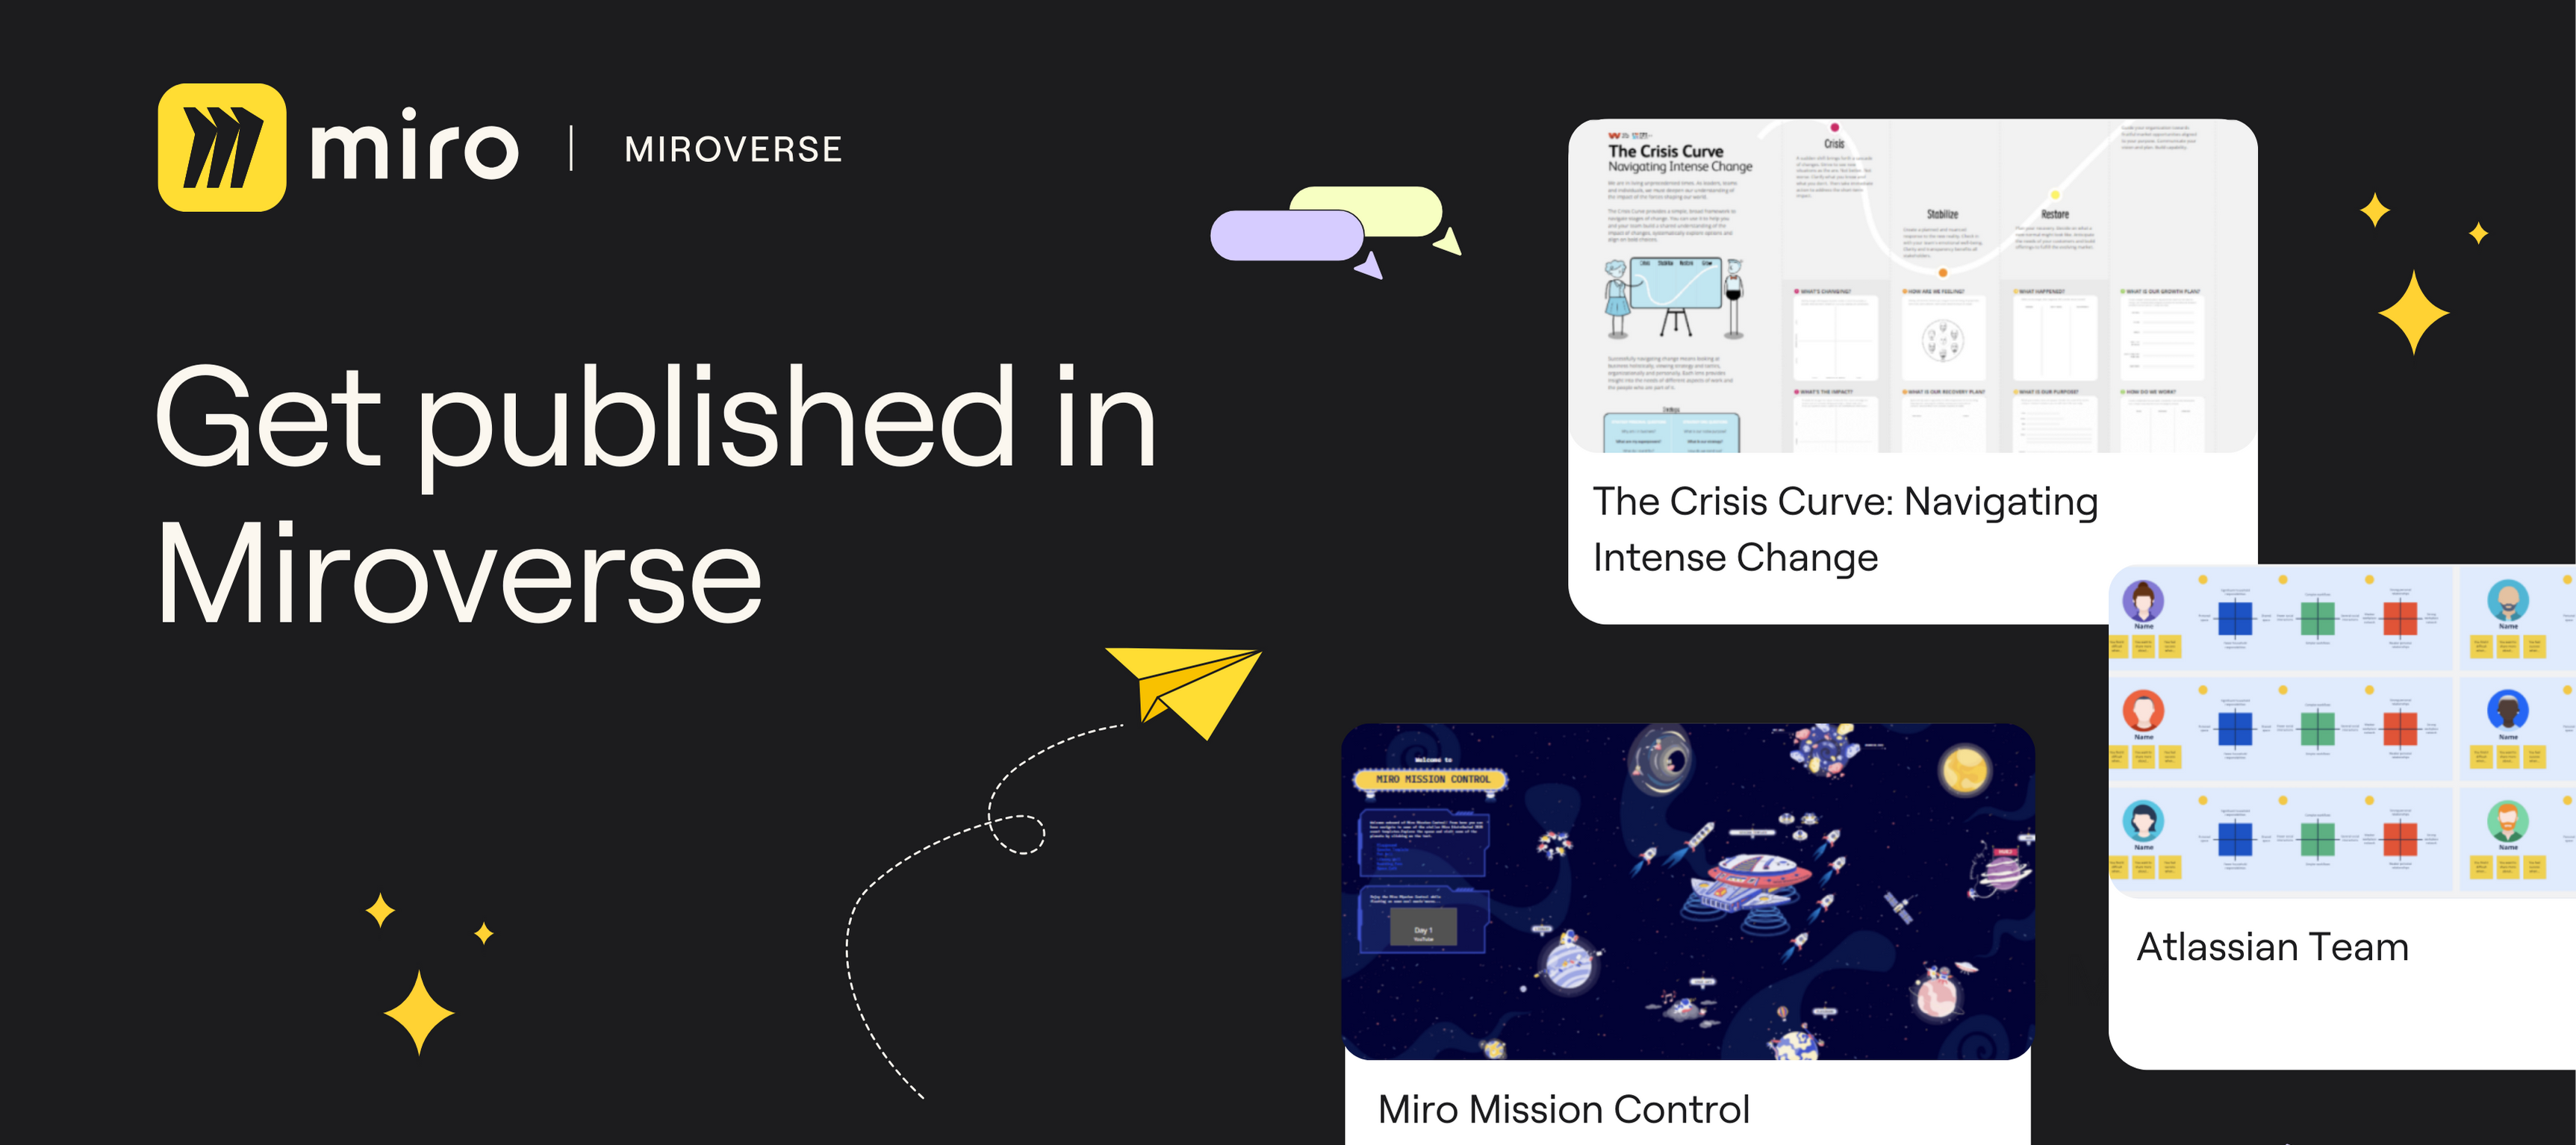 Everything you need to know to get published in Miroverse